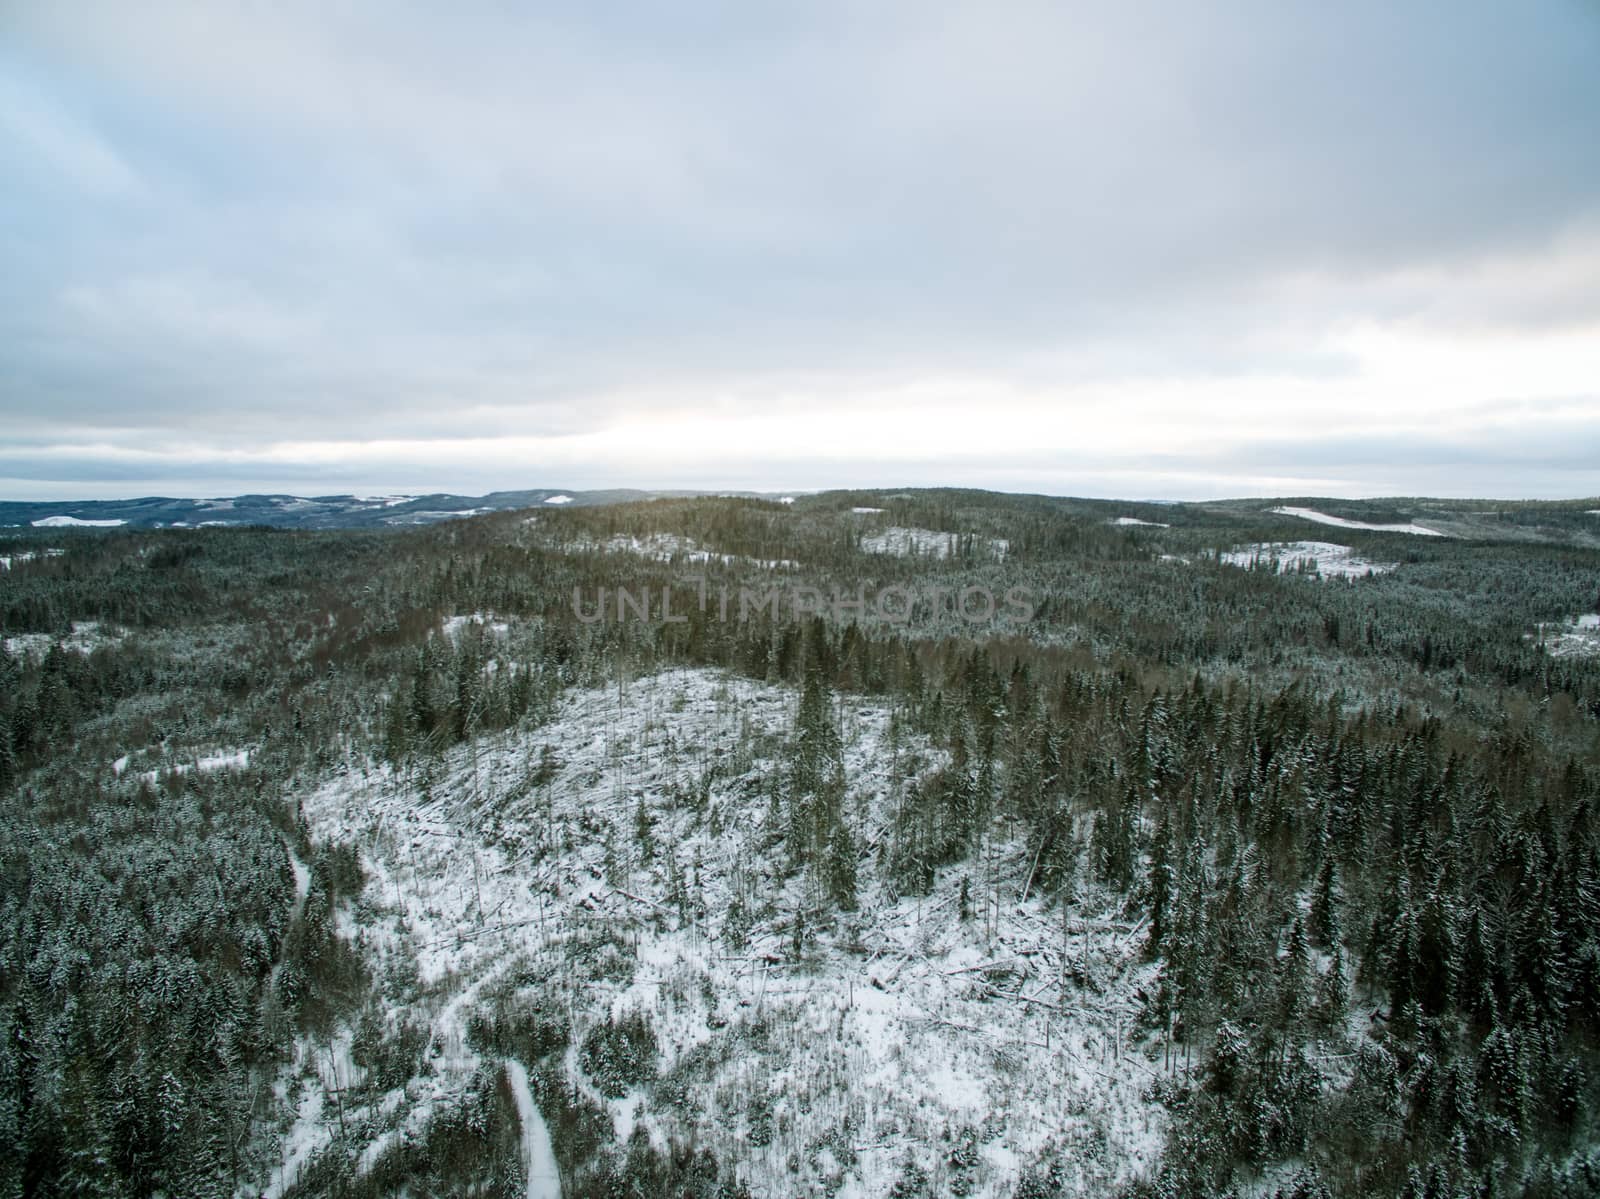 Fresh air above the forest in late winter